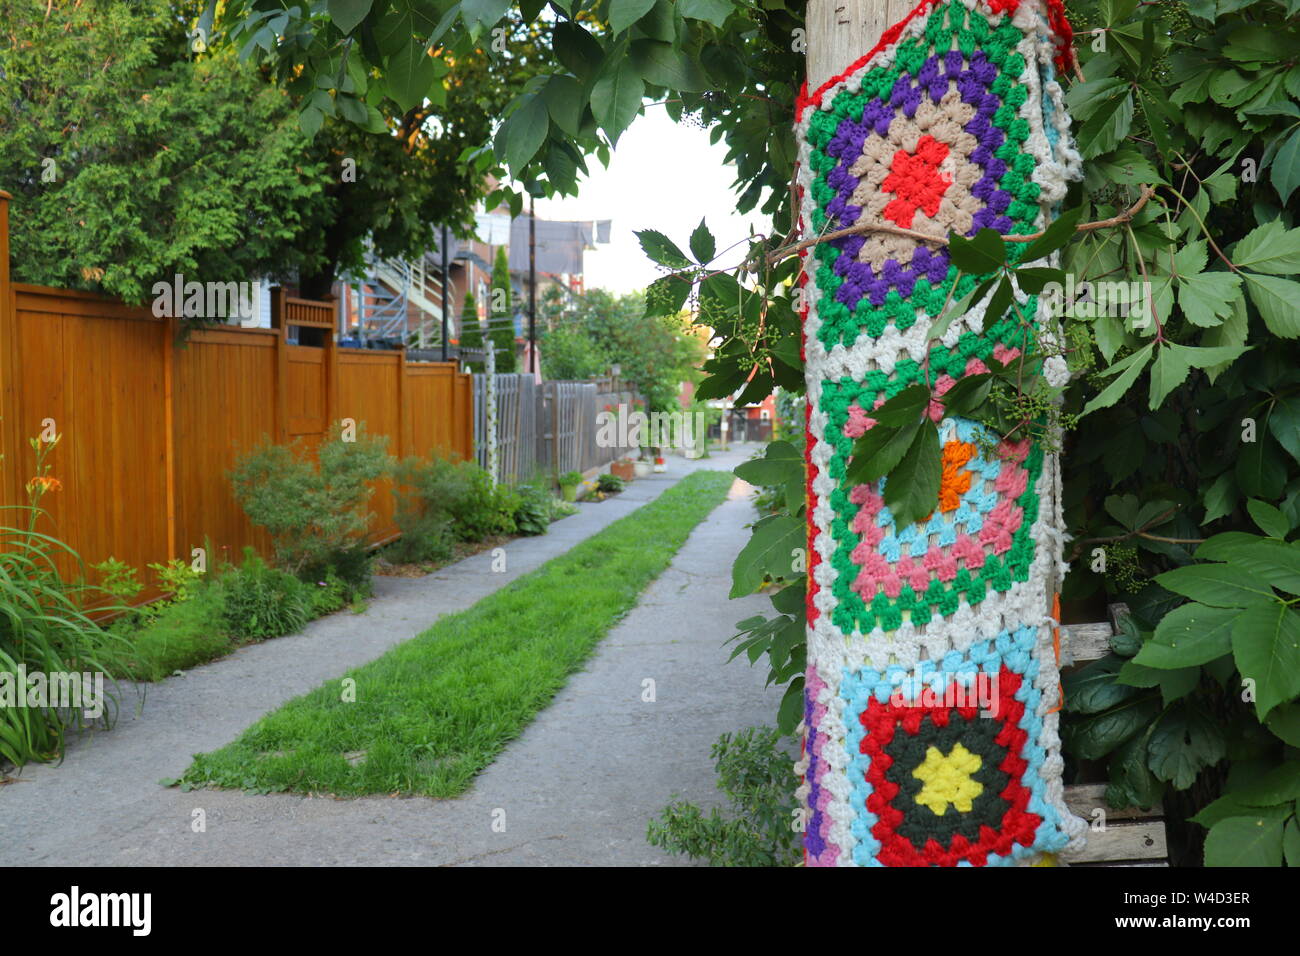 Yarn Bombing in a Back Green Alley, Knitted Decoration, Montreal Stock Photo